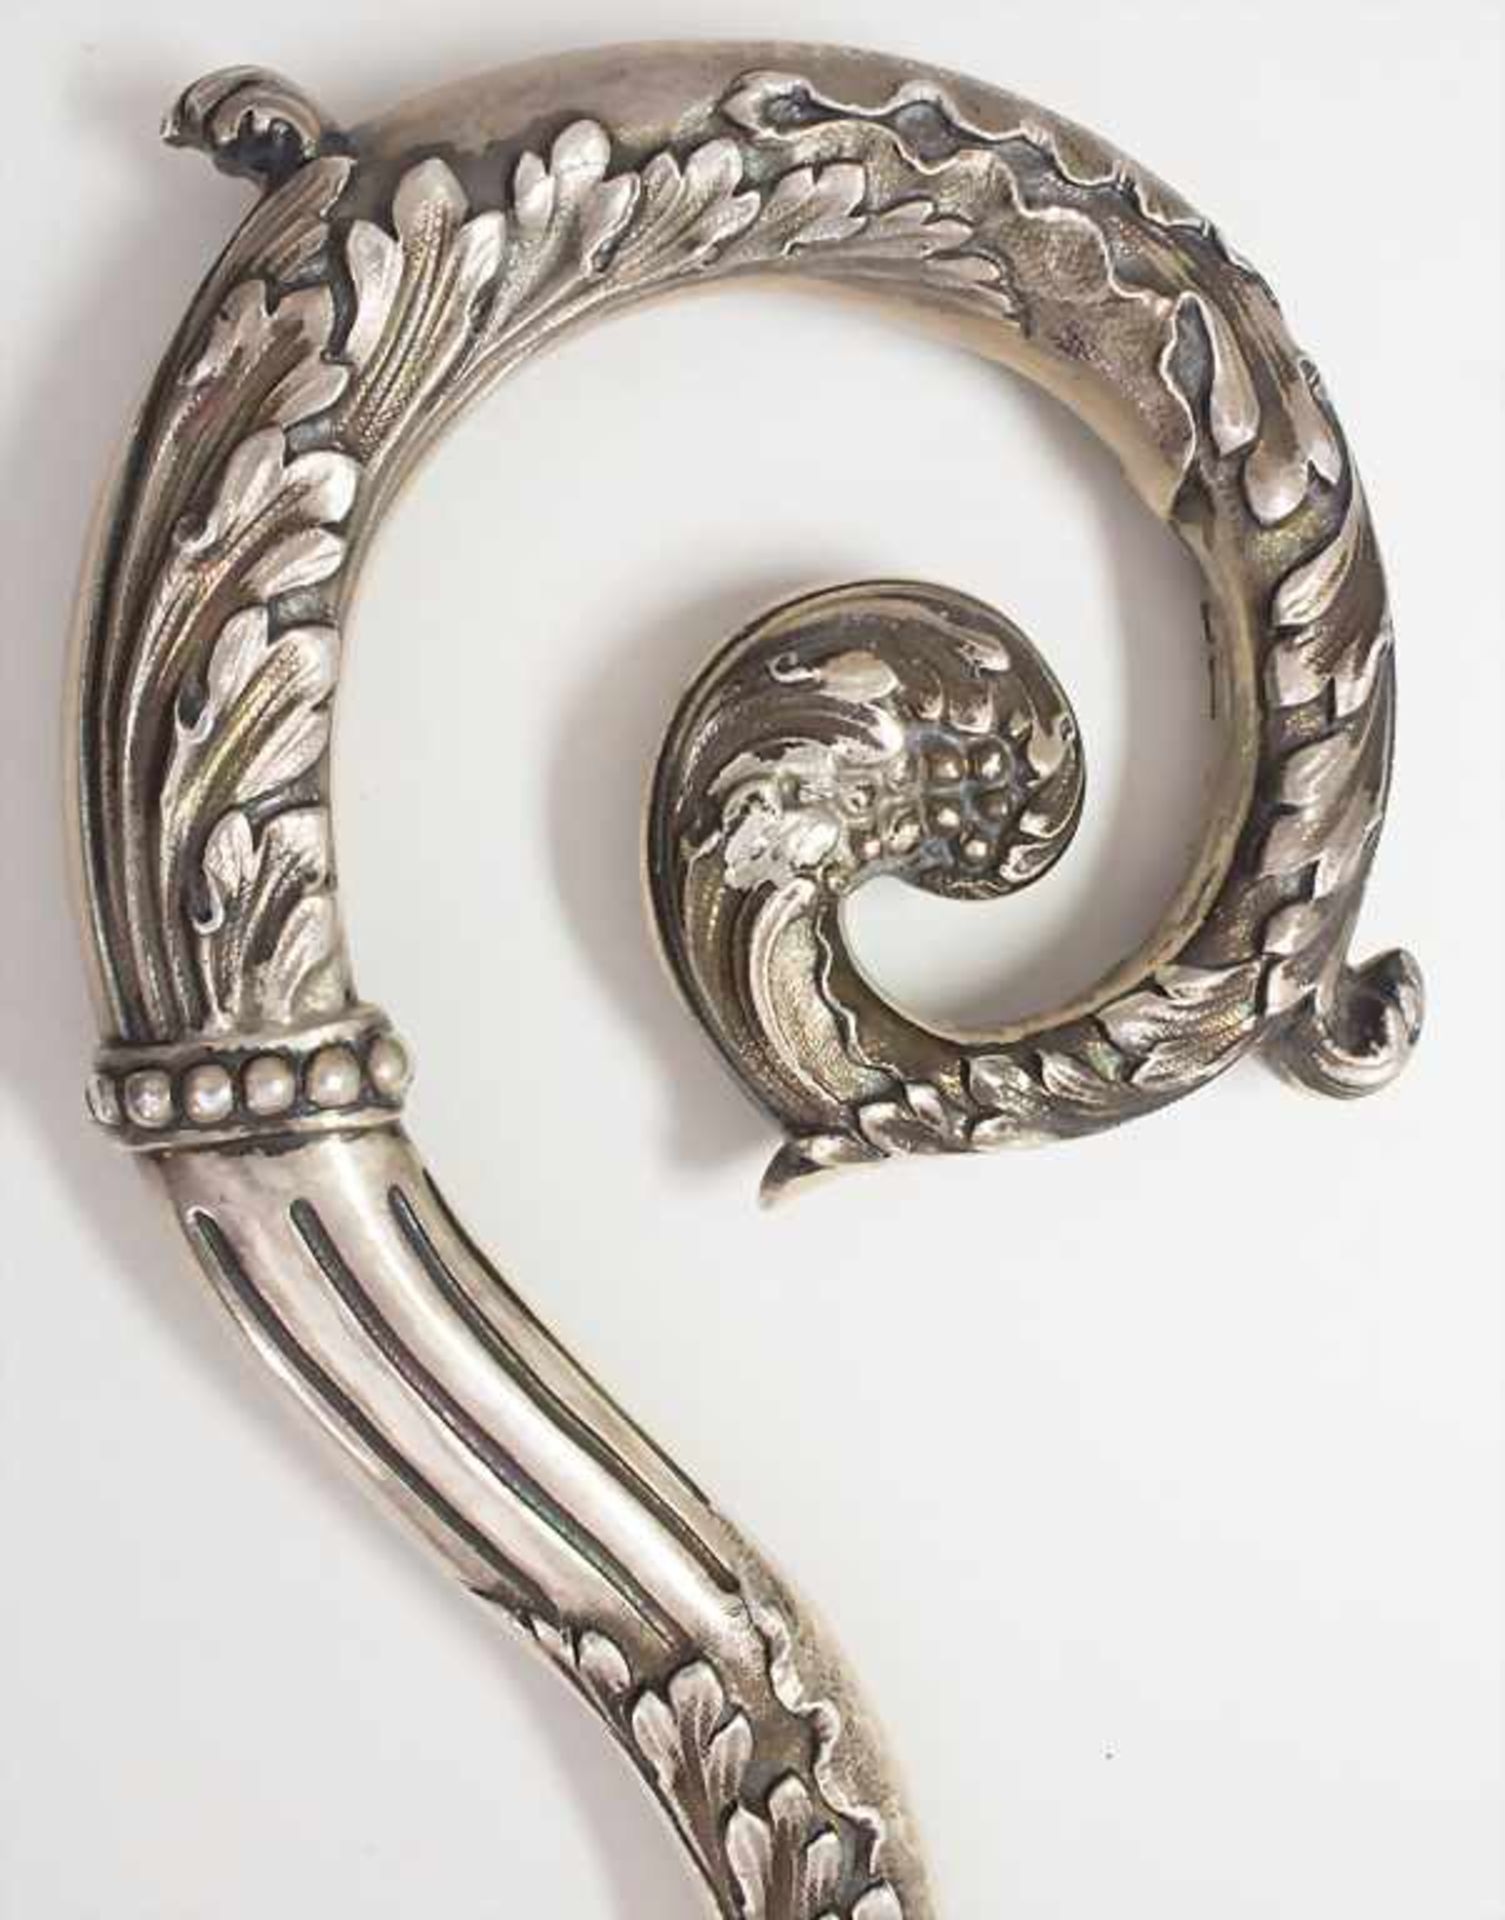 Griff eines Bischofsstabs / The silver handle from a bishop's crozier, Frankreich, 19. Jh. - Image 4 of 4